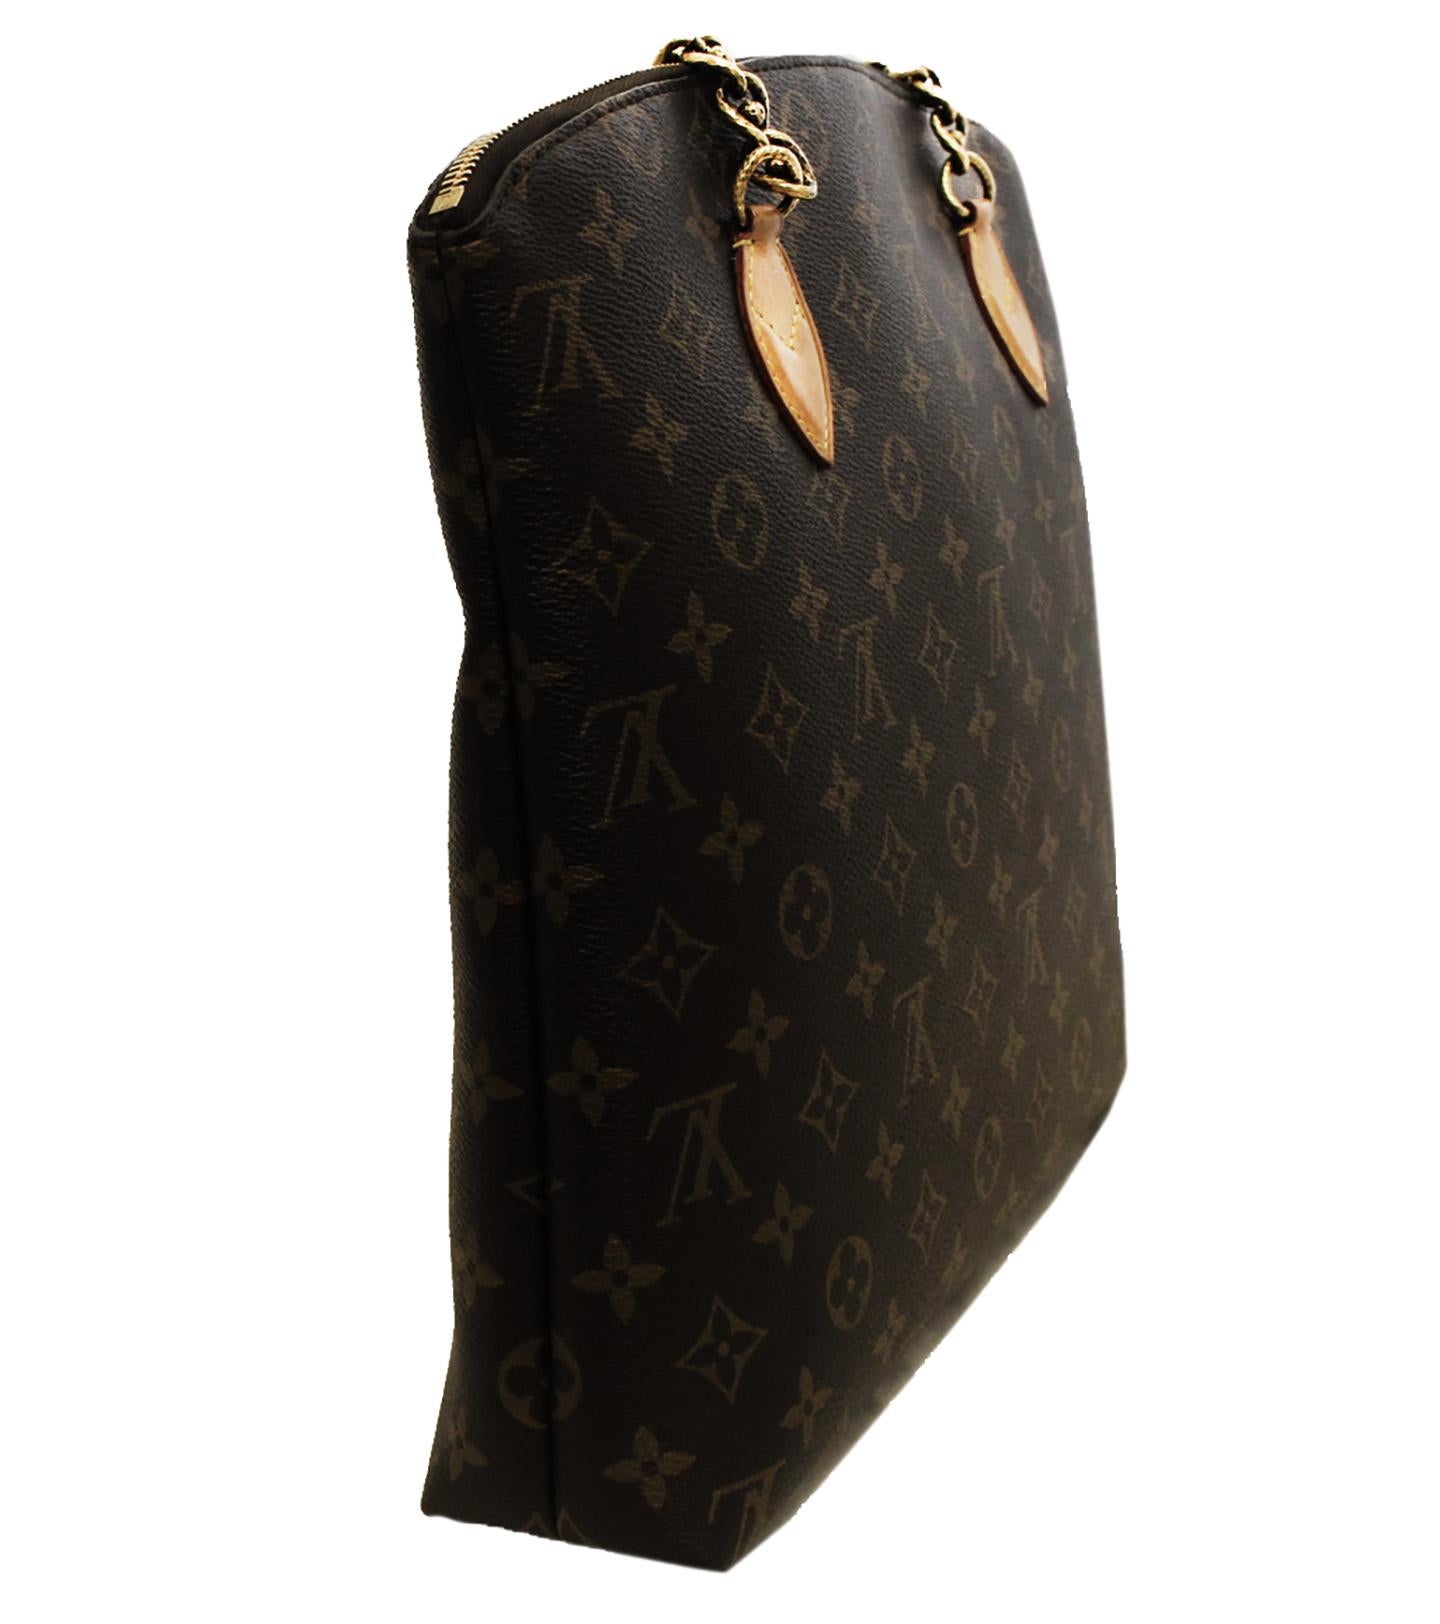 Black Louis Vuitton Monogram Lockit Chain & Leather Top Satchel 2013-2014 Fall Coll. For Sale